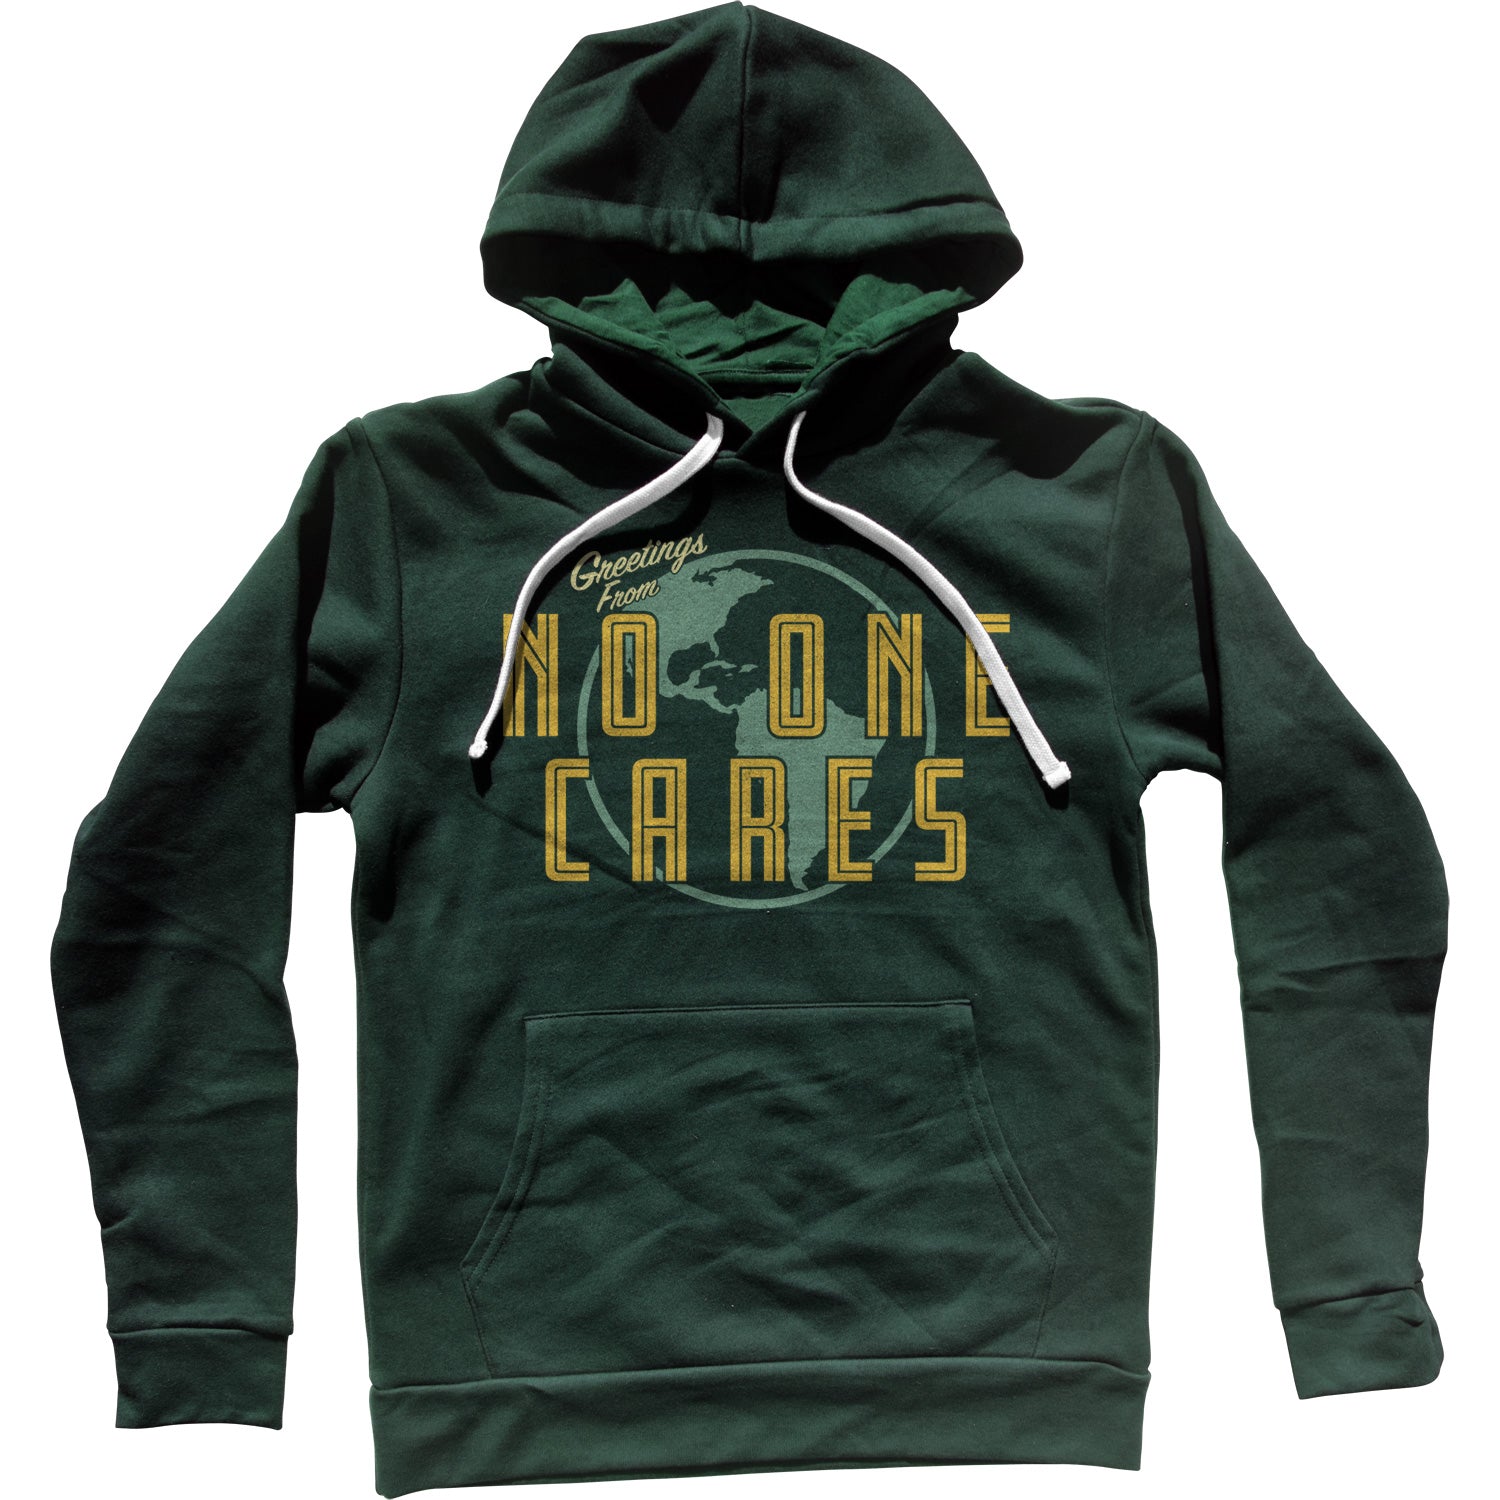 Greetings From No One Cares Unisex Hoodie